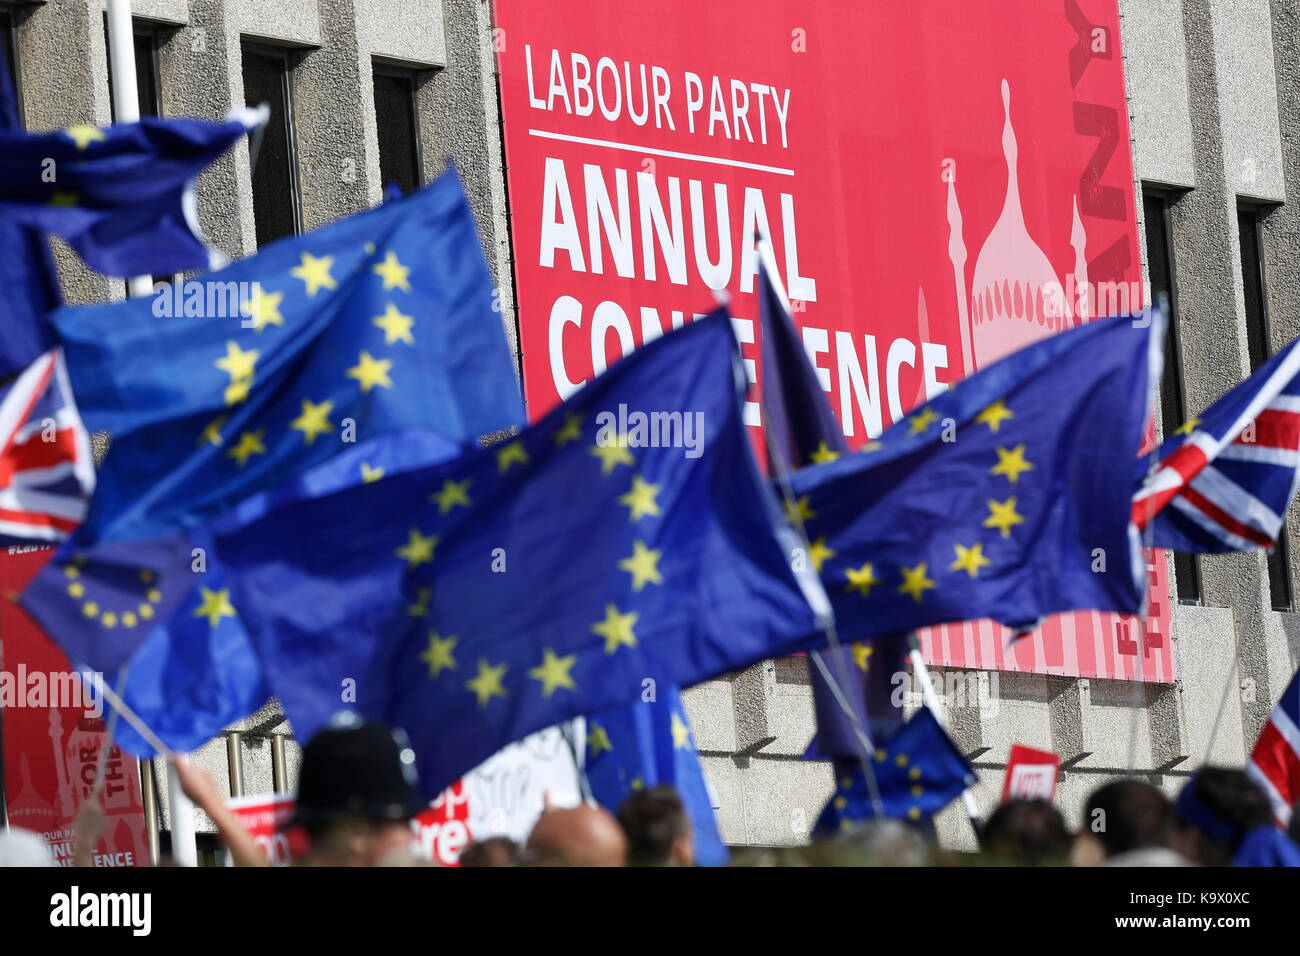 Brighton, UK. 24th September, 2017. Pro European Union supporters demonstrate during a protest against Brexit in Brighton, UK, Sunday, September 24, 2017. Protesters rallied outside the annual Labour Party Conference being held in Brighton and attended by the opposition leader Jeremy Corbyn. Photograph : Credit: Luke MacGregor/Alamy Live News Stock Photo